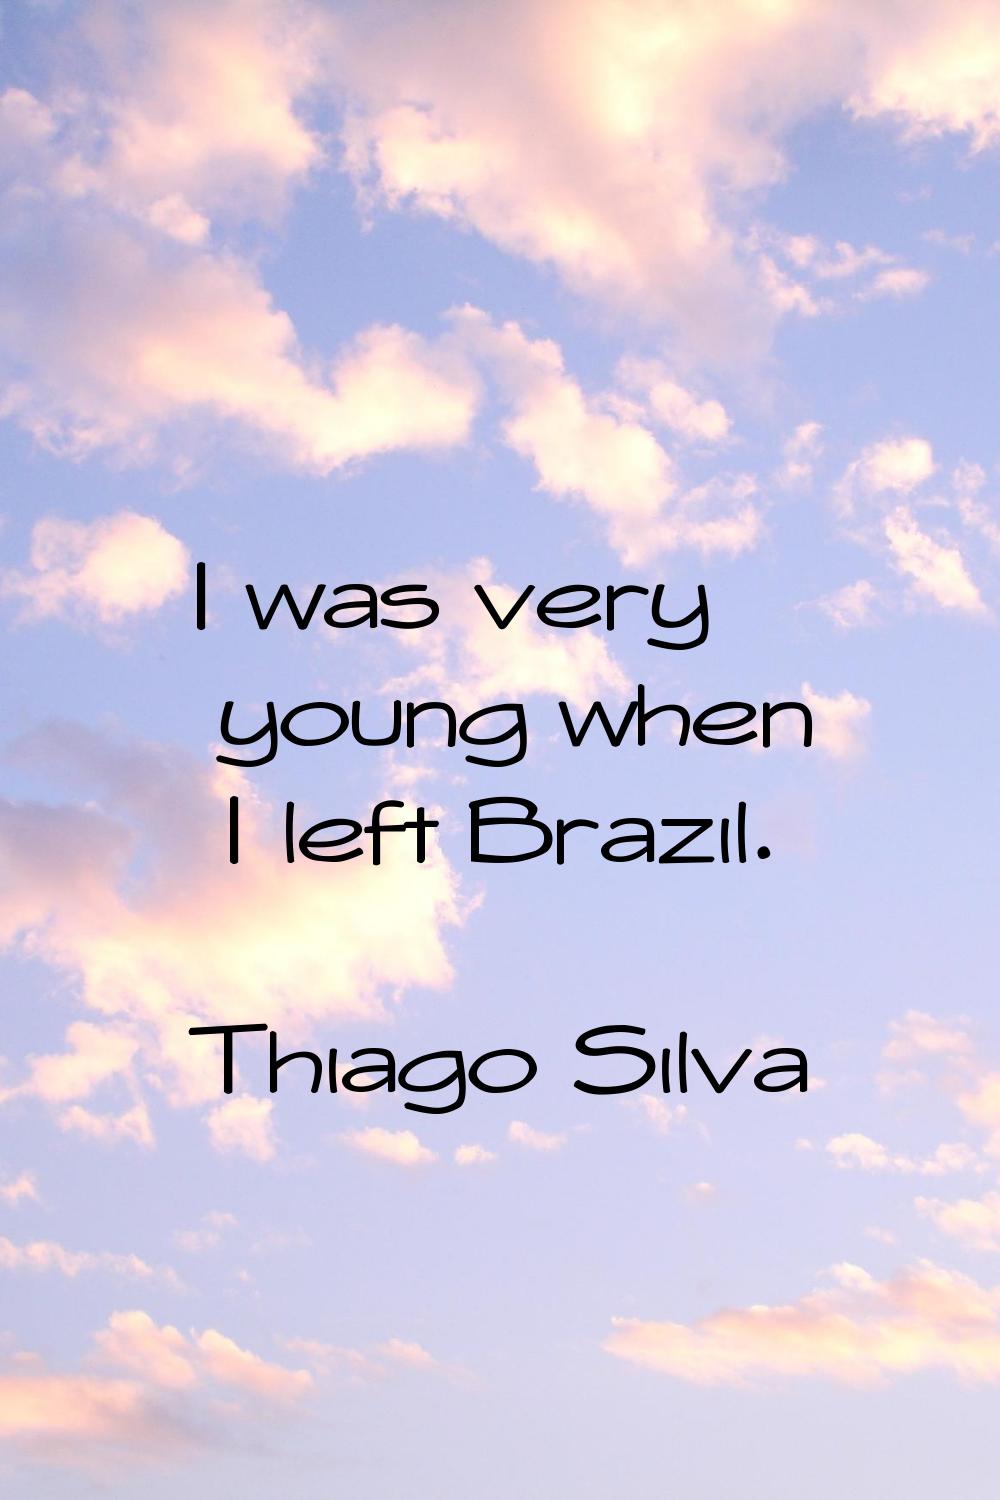 I was very young when I left Brazil.